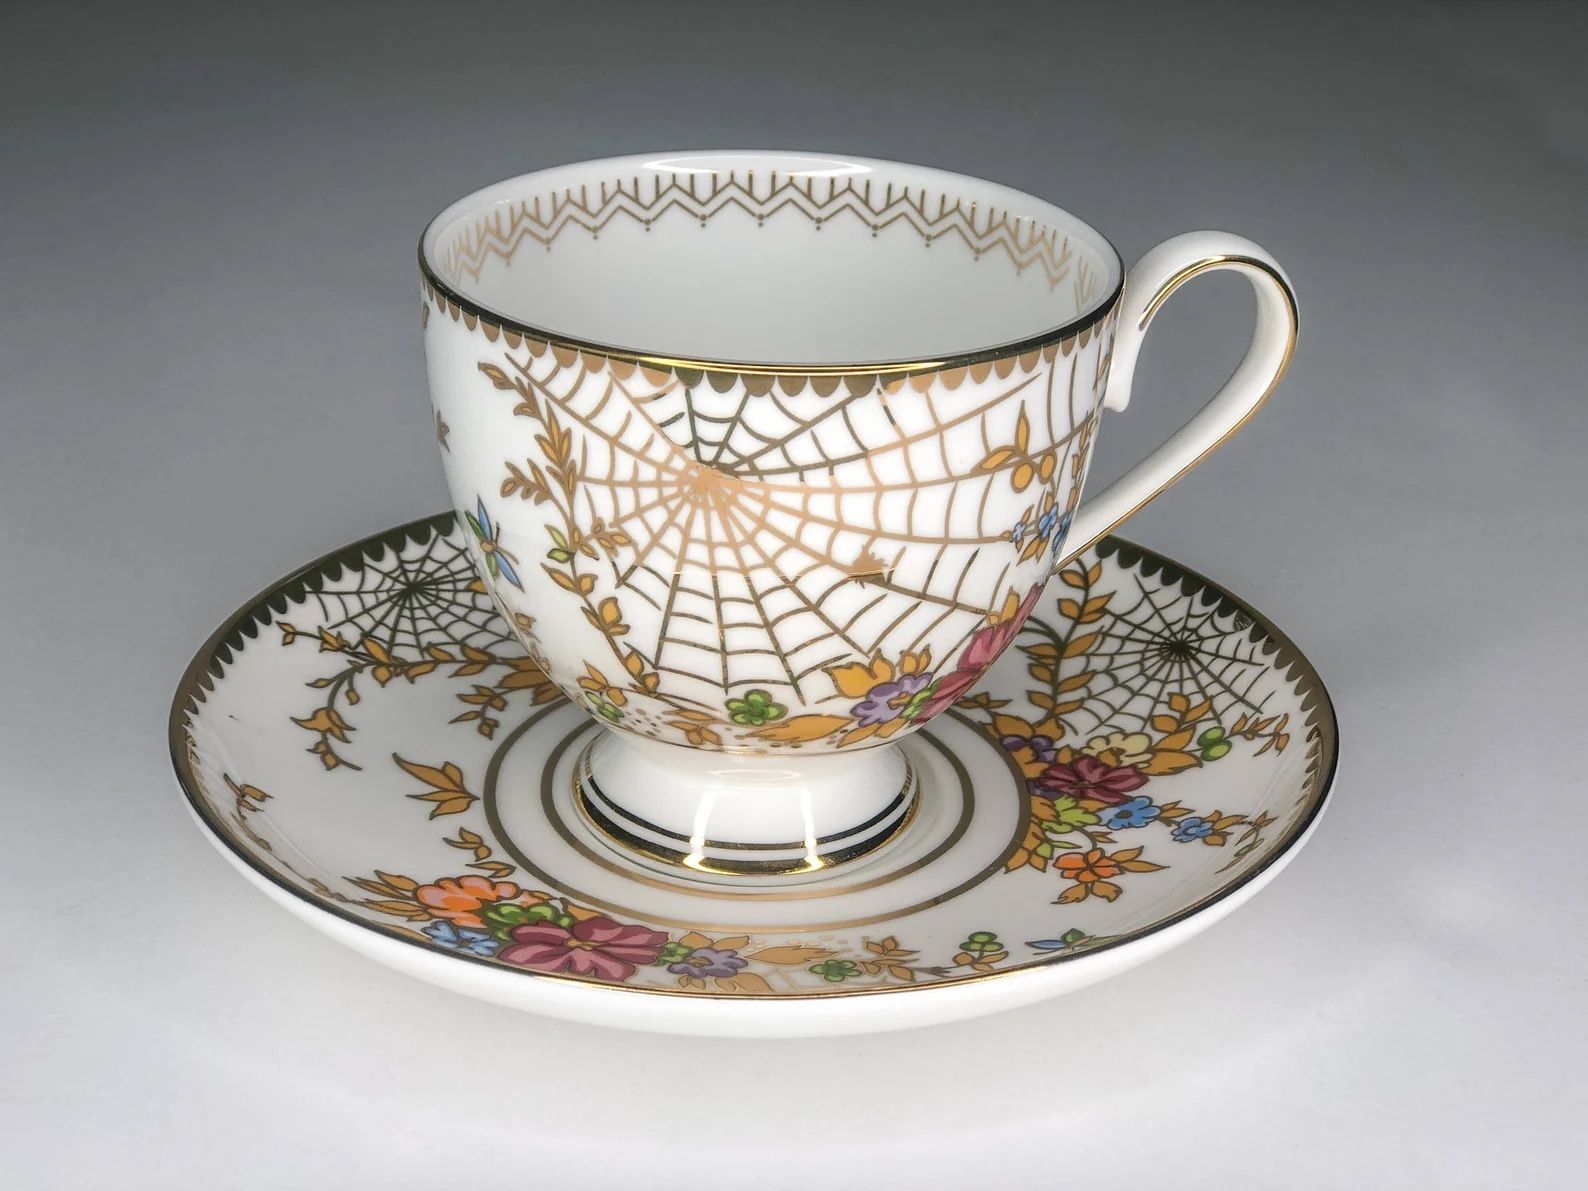 teacup with gold spiderweb pattern on it